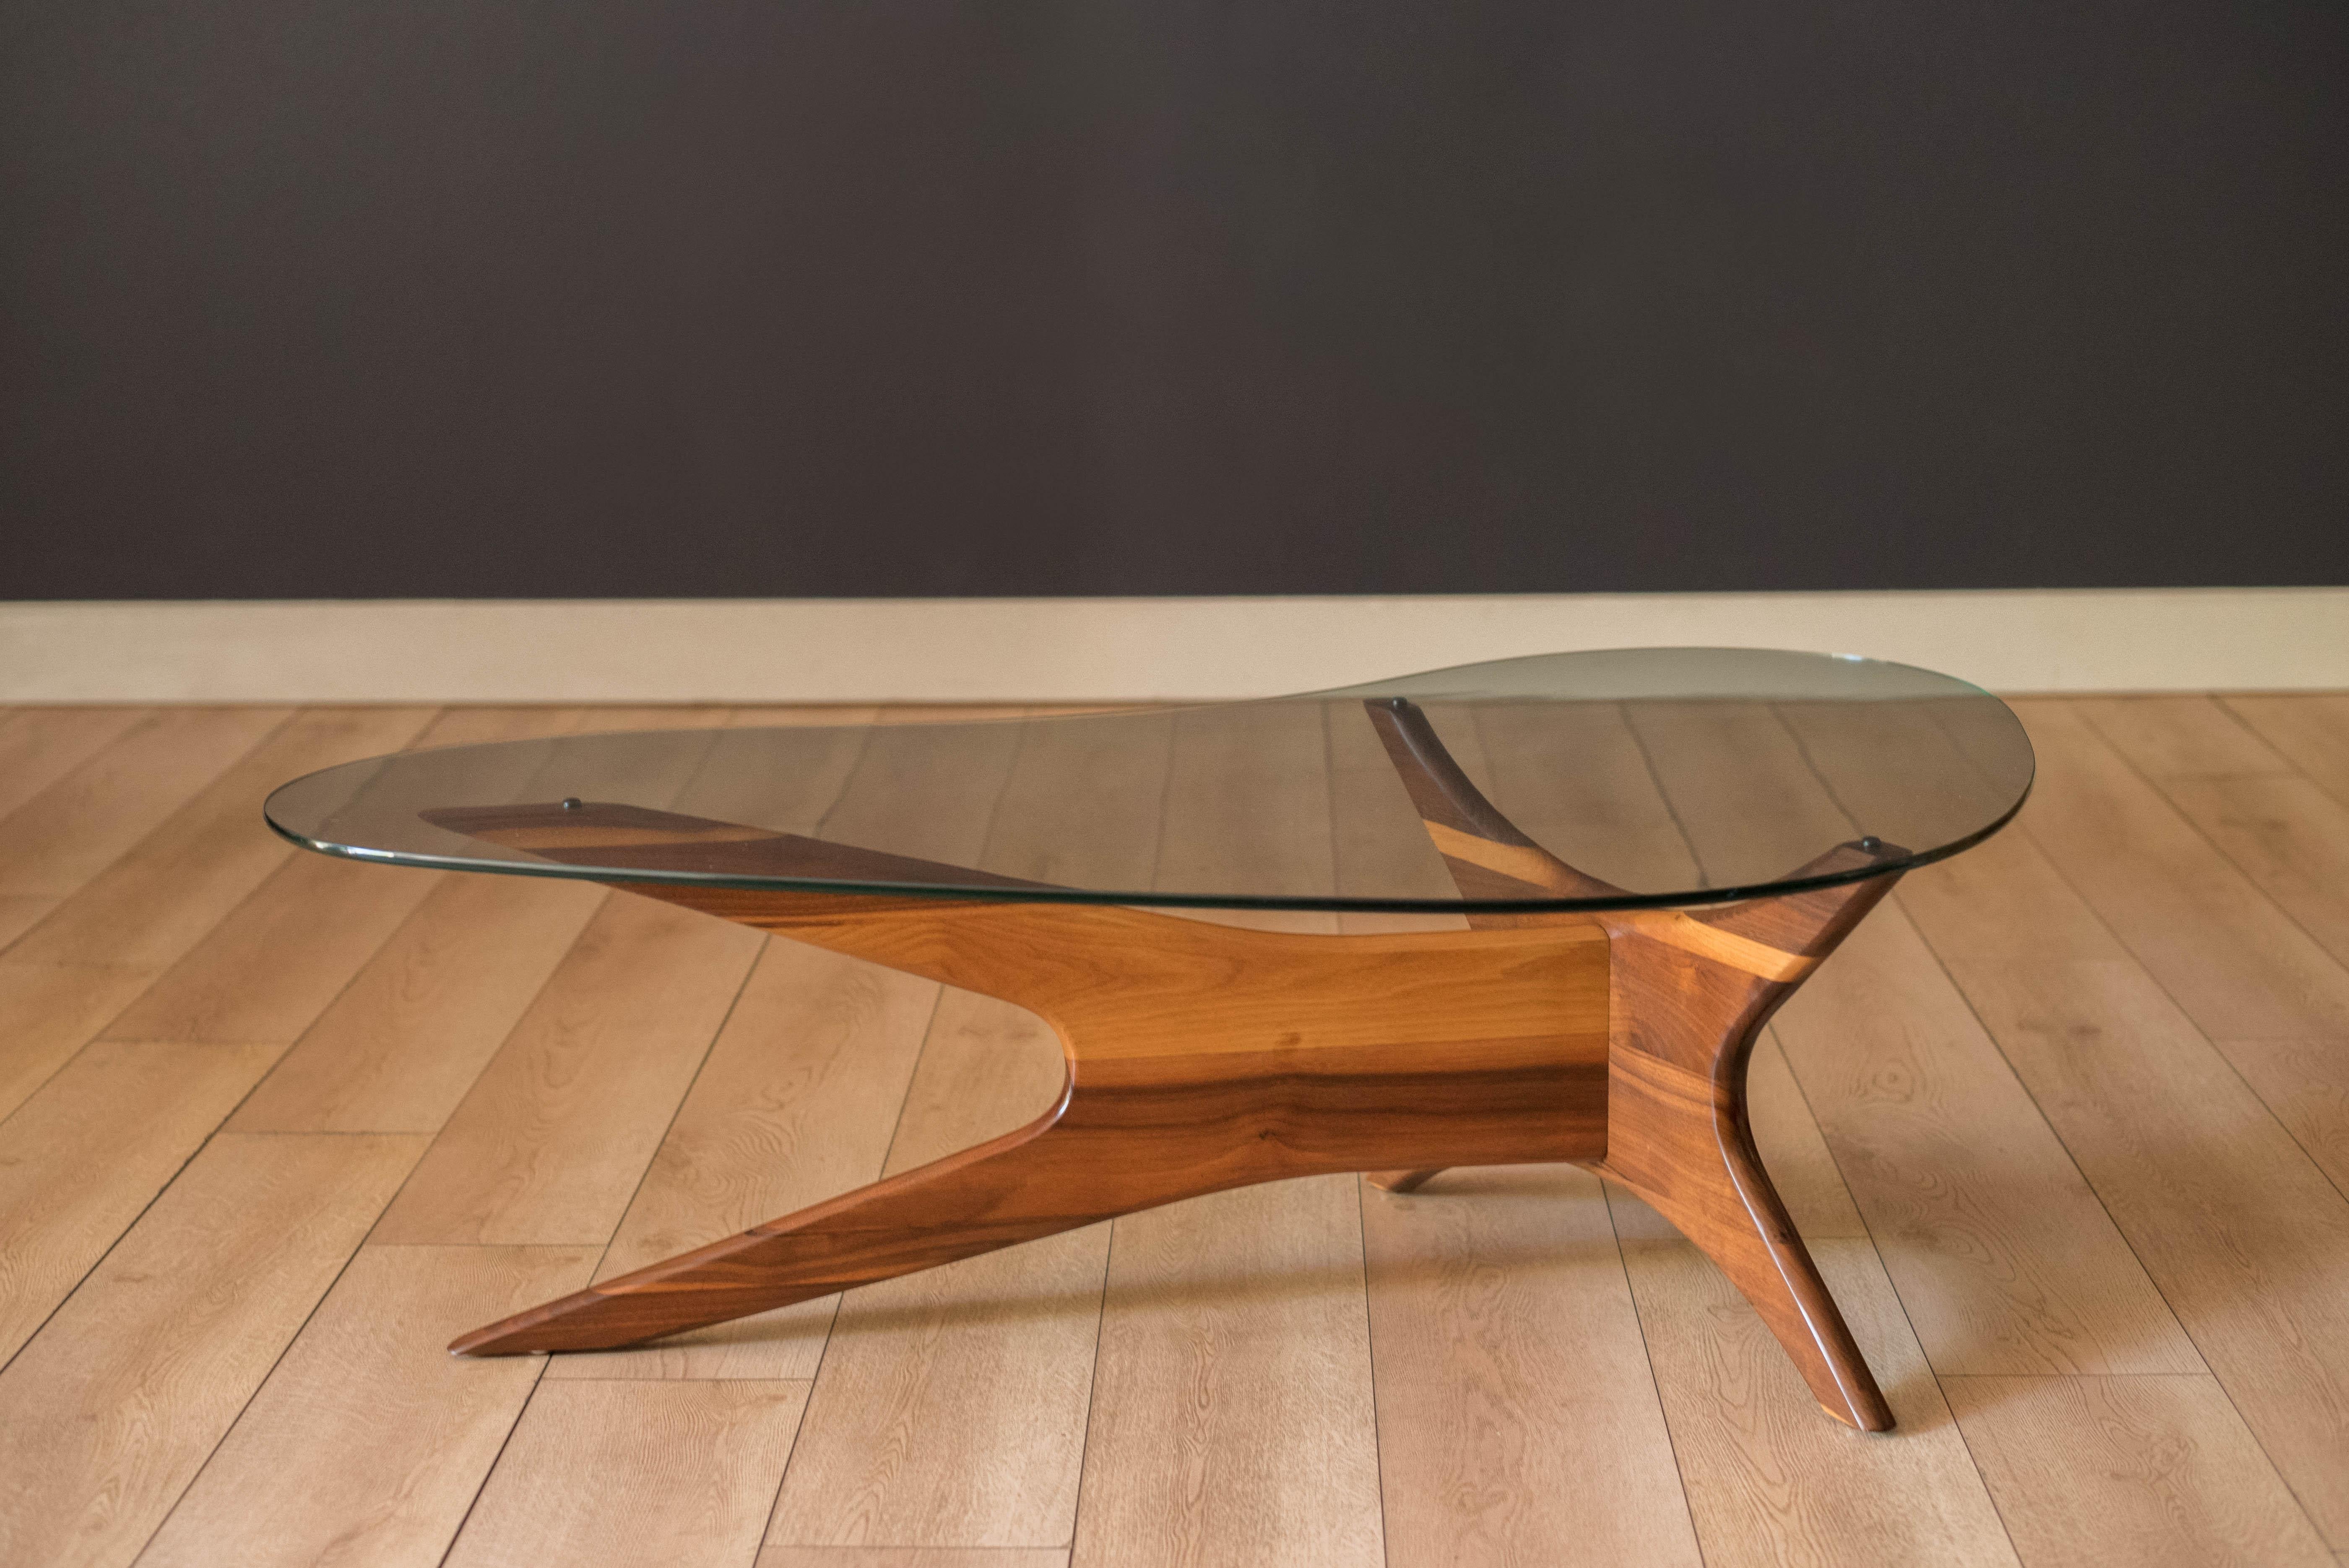 Vintage 'Jacks' coffee table model no. 1465-T designed by Adrian Pearsall for Craft Associates. Features a sculptural solid walnut supporting base and includes the original biomorphic glass shaped top. The matching pair of side tables are available